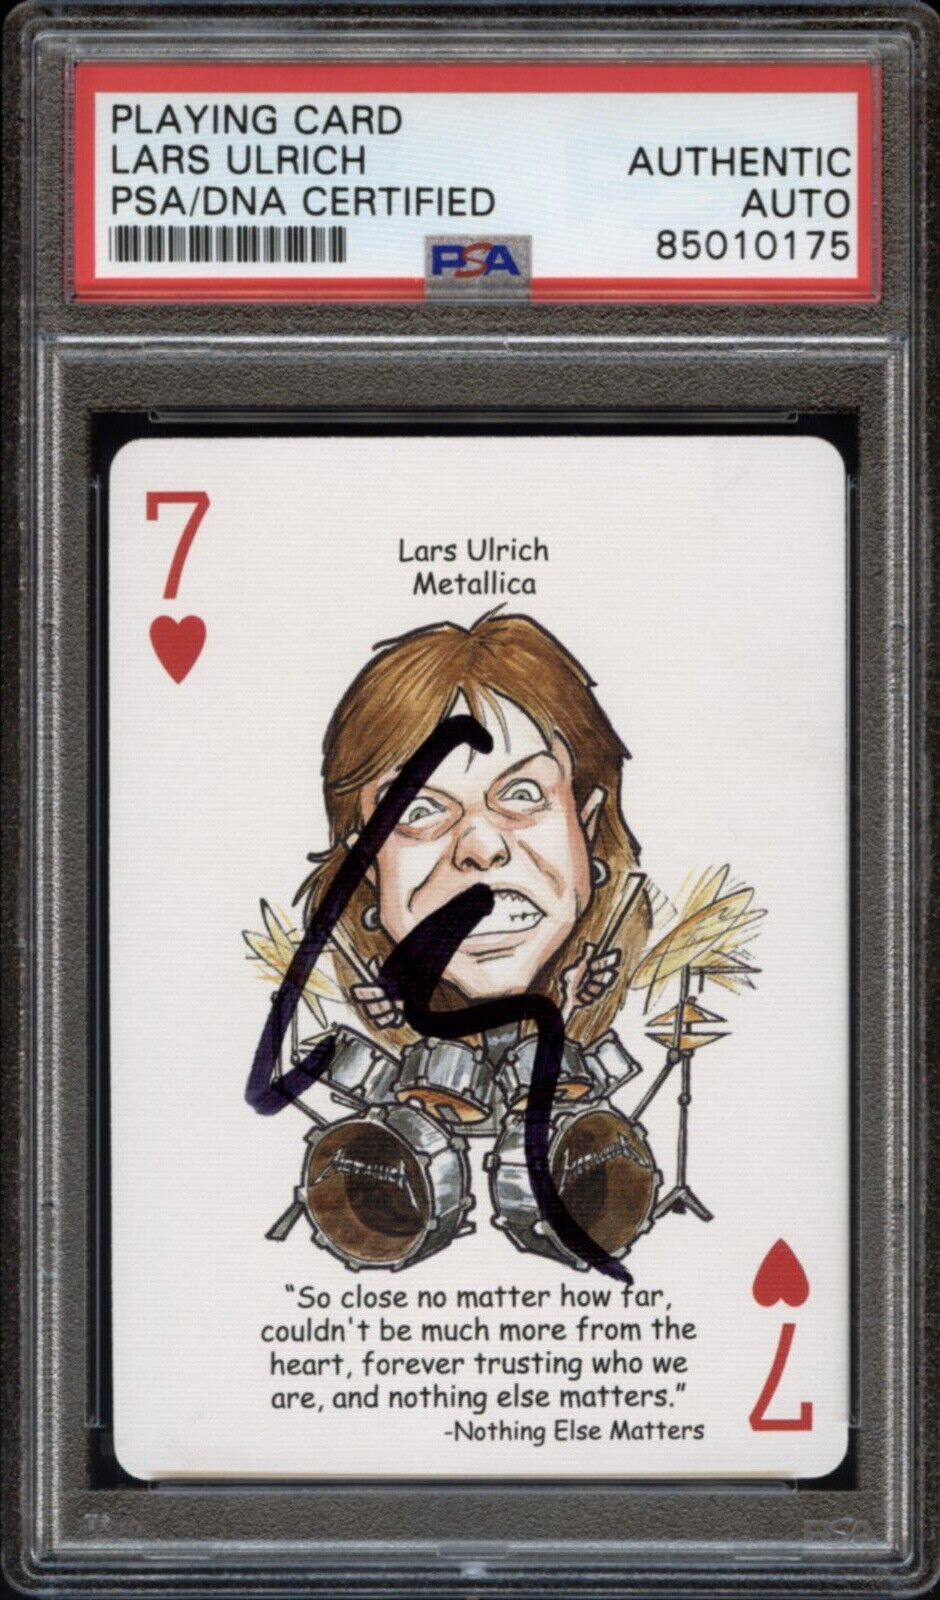 2012 Hero Decks Rock \'N Roll Playing Card Lars Ulrich Auto PSA/DNA Authenticated